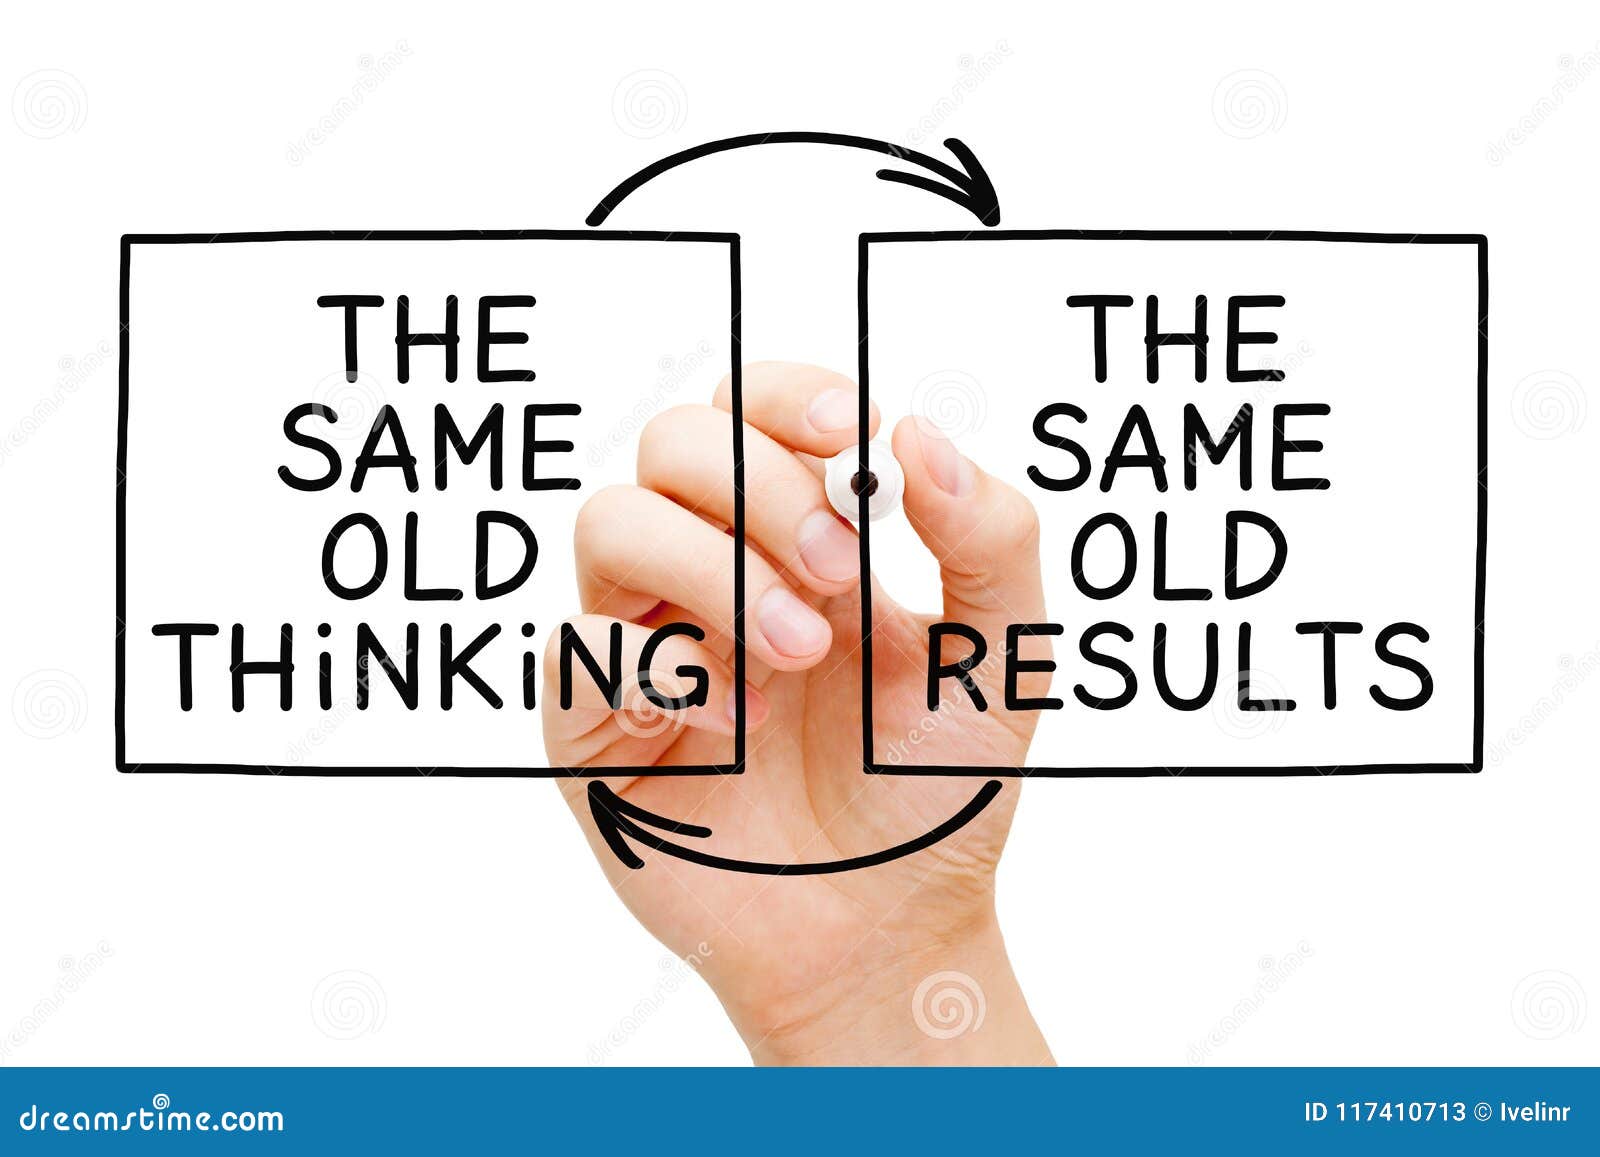 the same old thinking the same old results